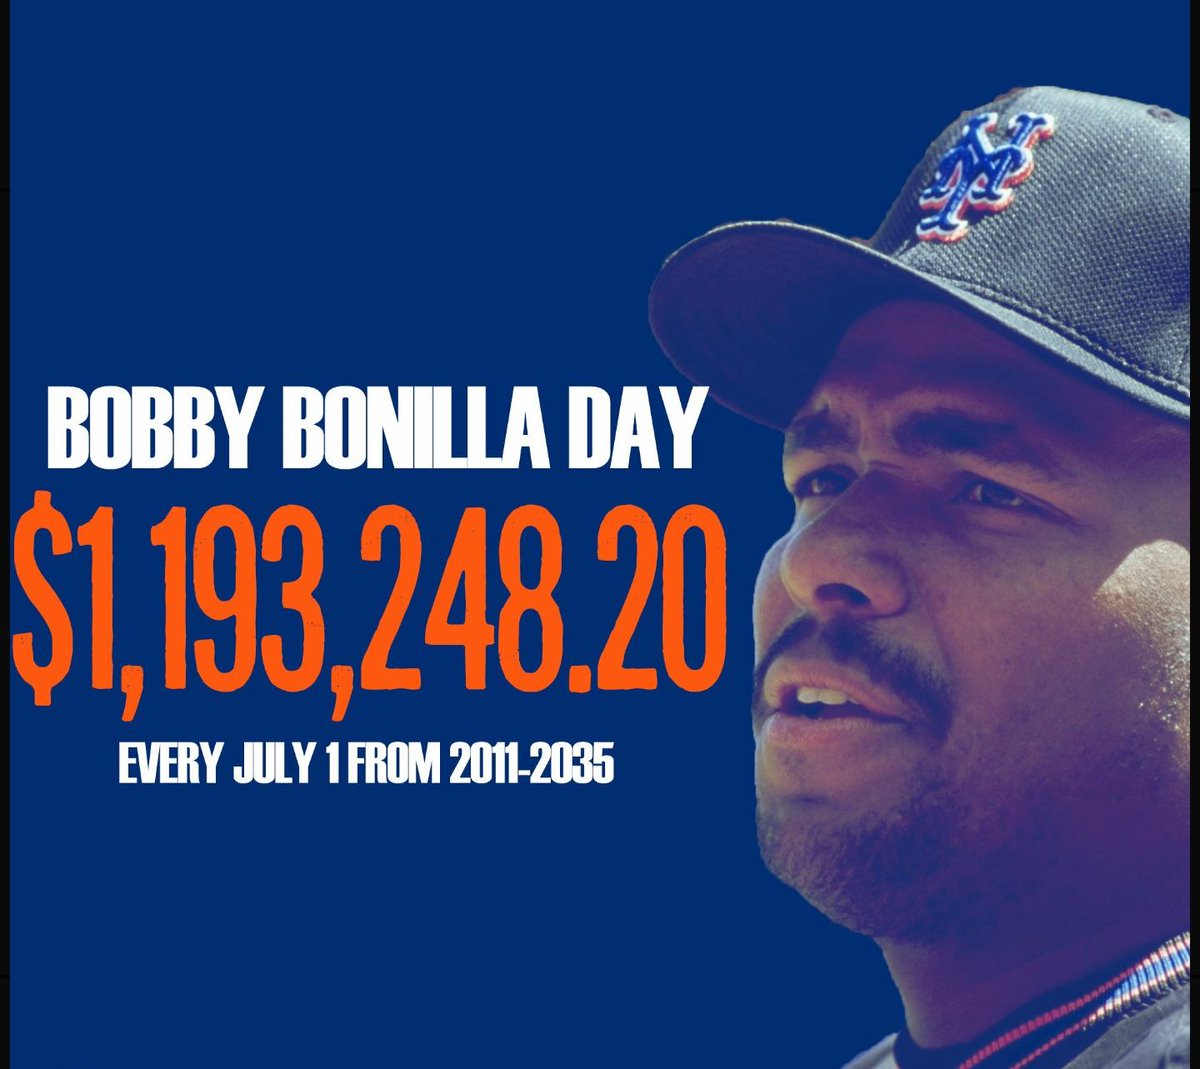 Happy Bobby Bonilla Day everyone!Here's to another year of this thread!(Thread)